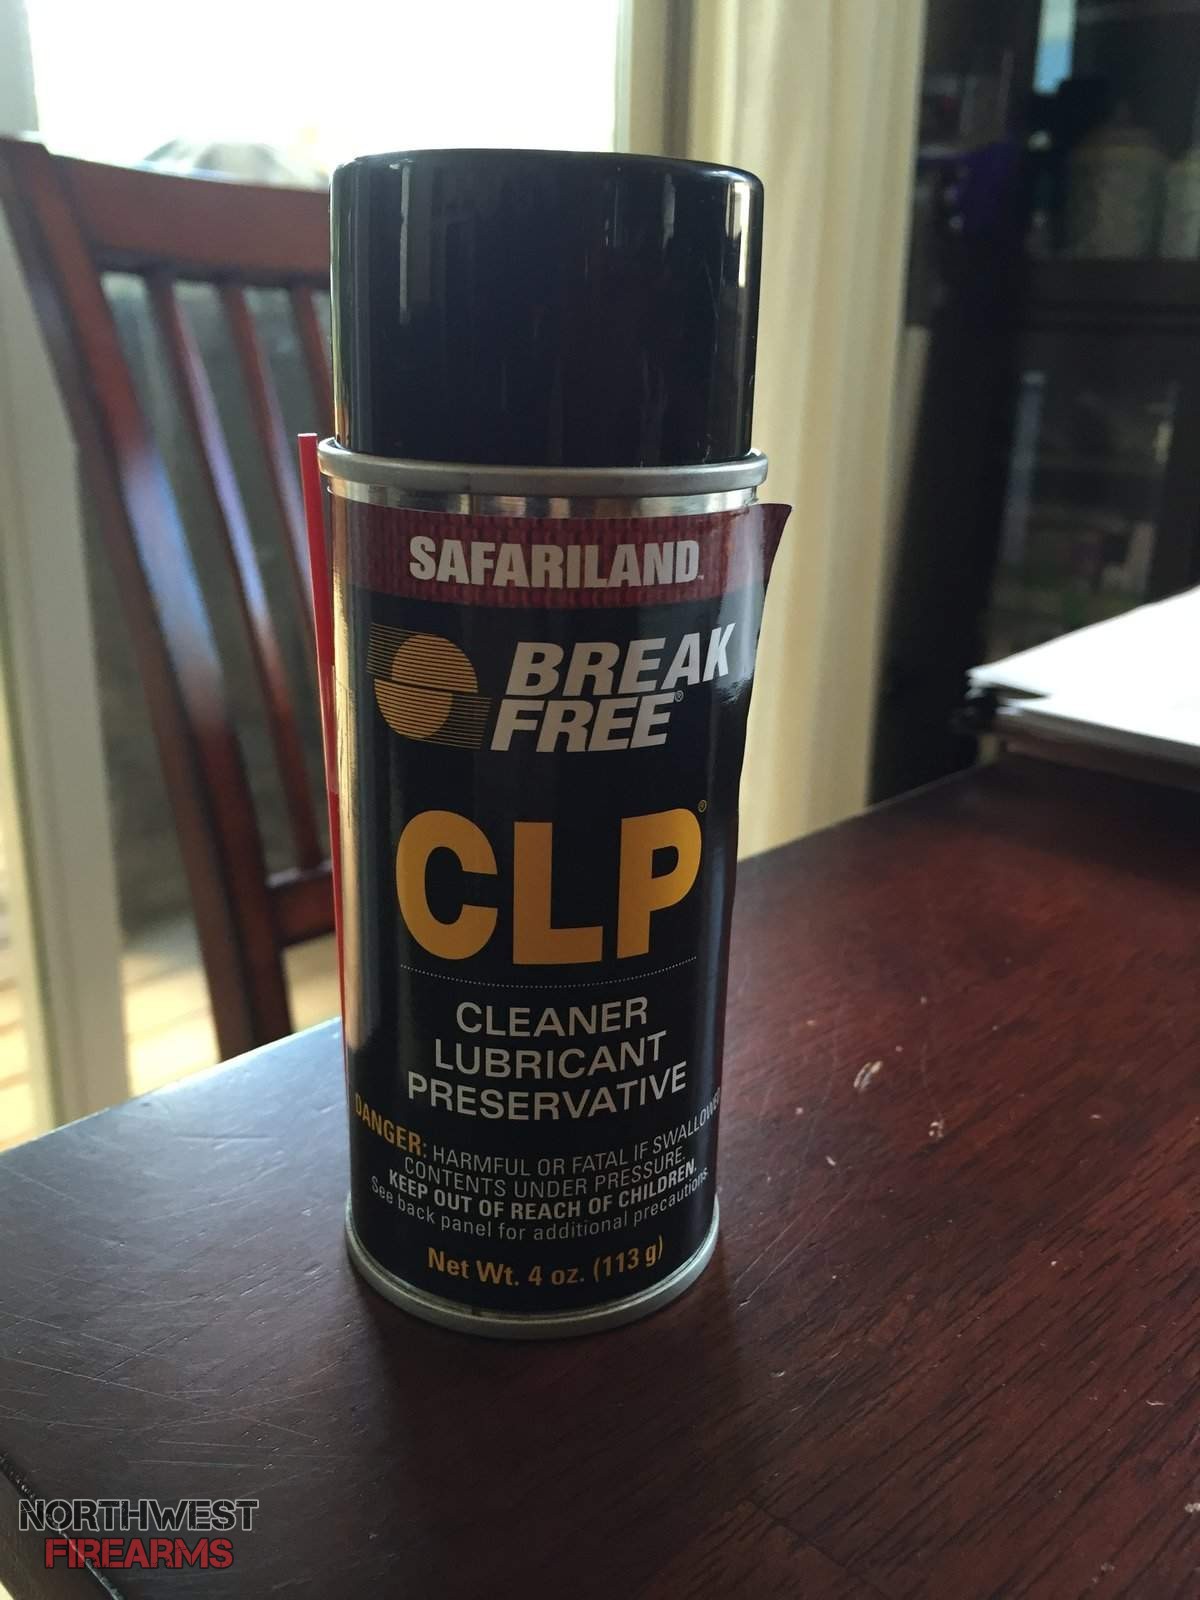 Anyone use CLP Break Free for cleaning or lubricating your guns?